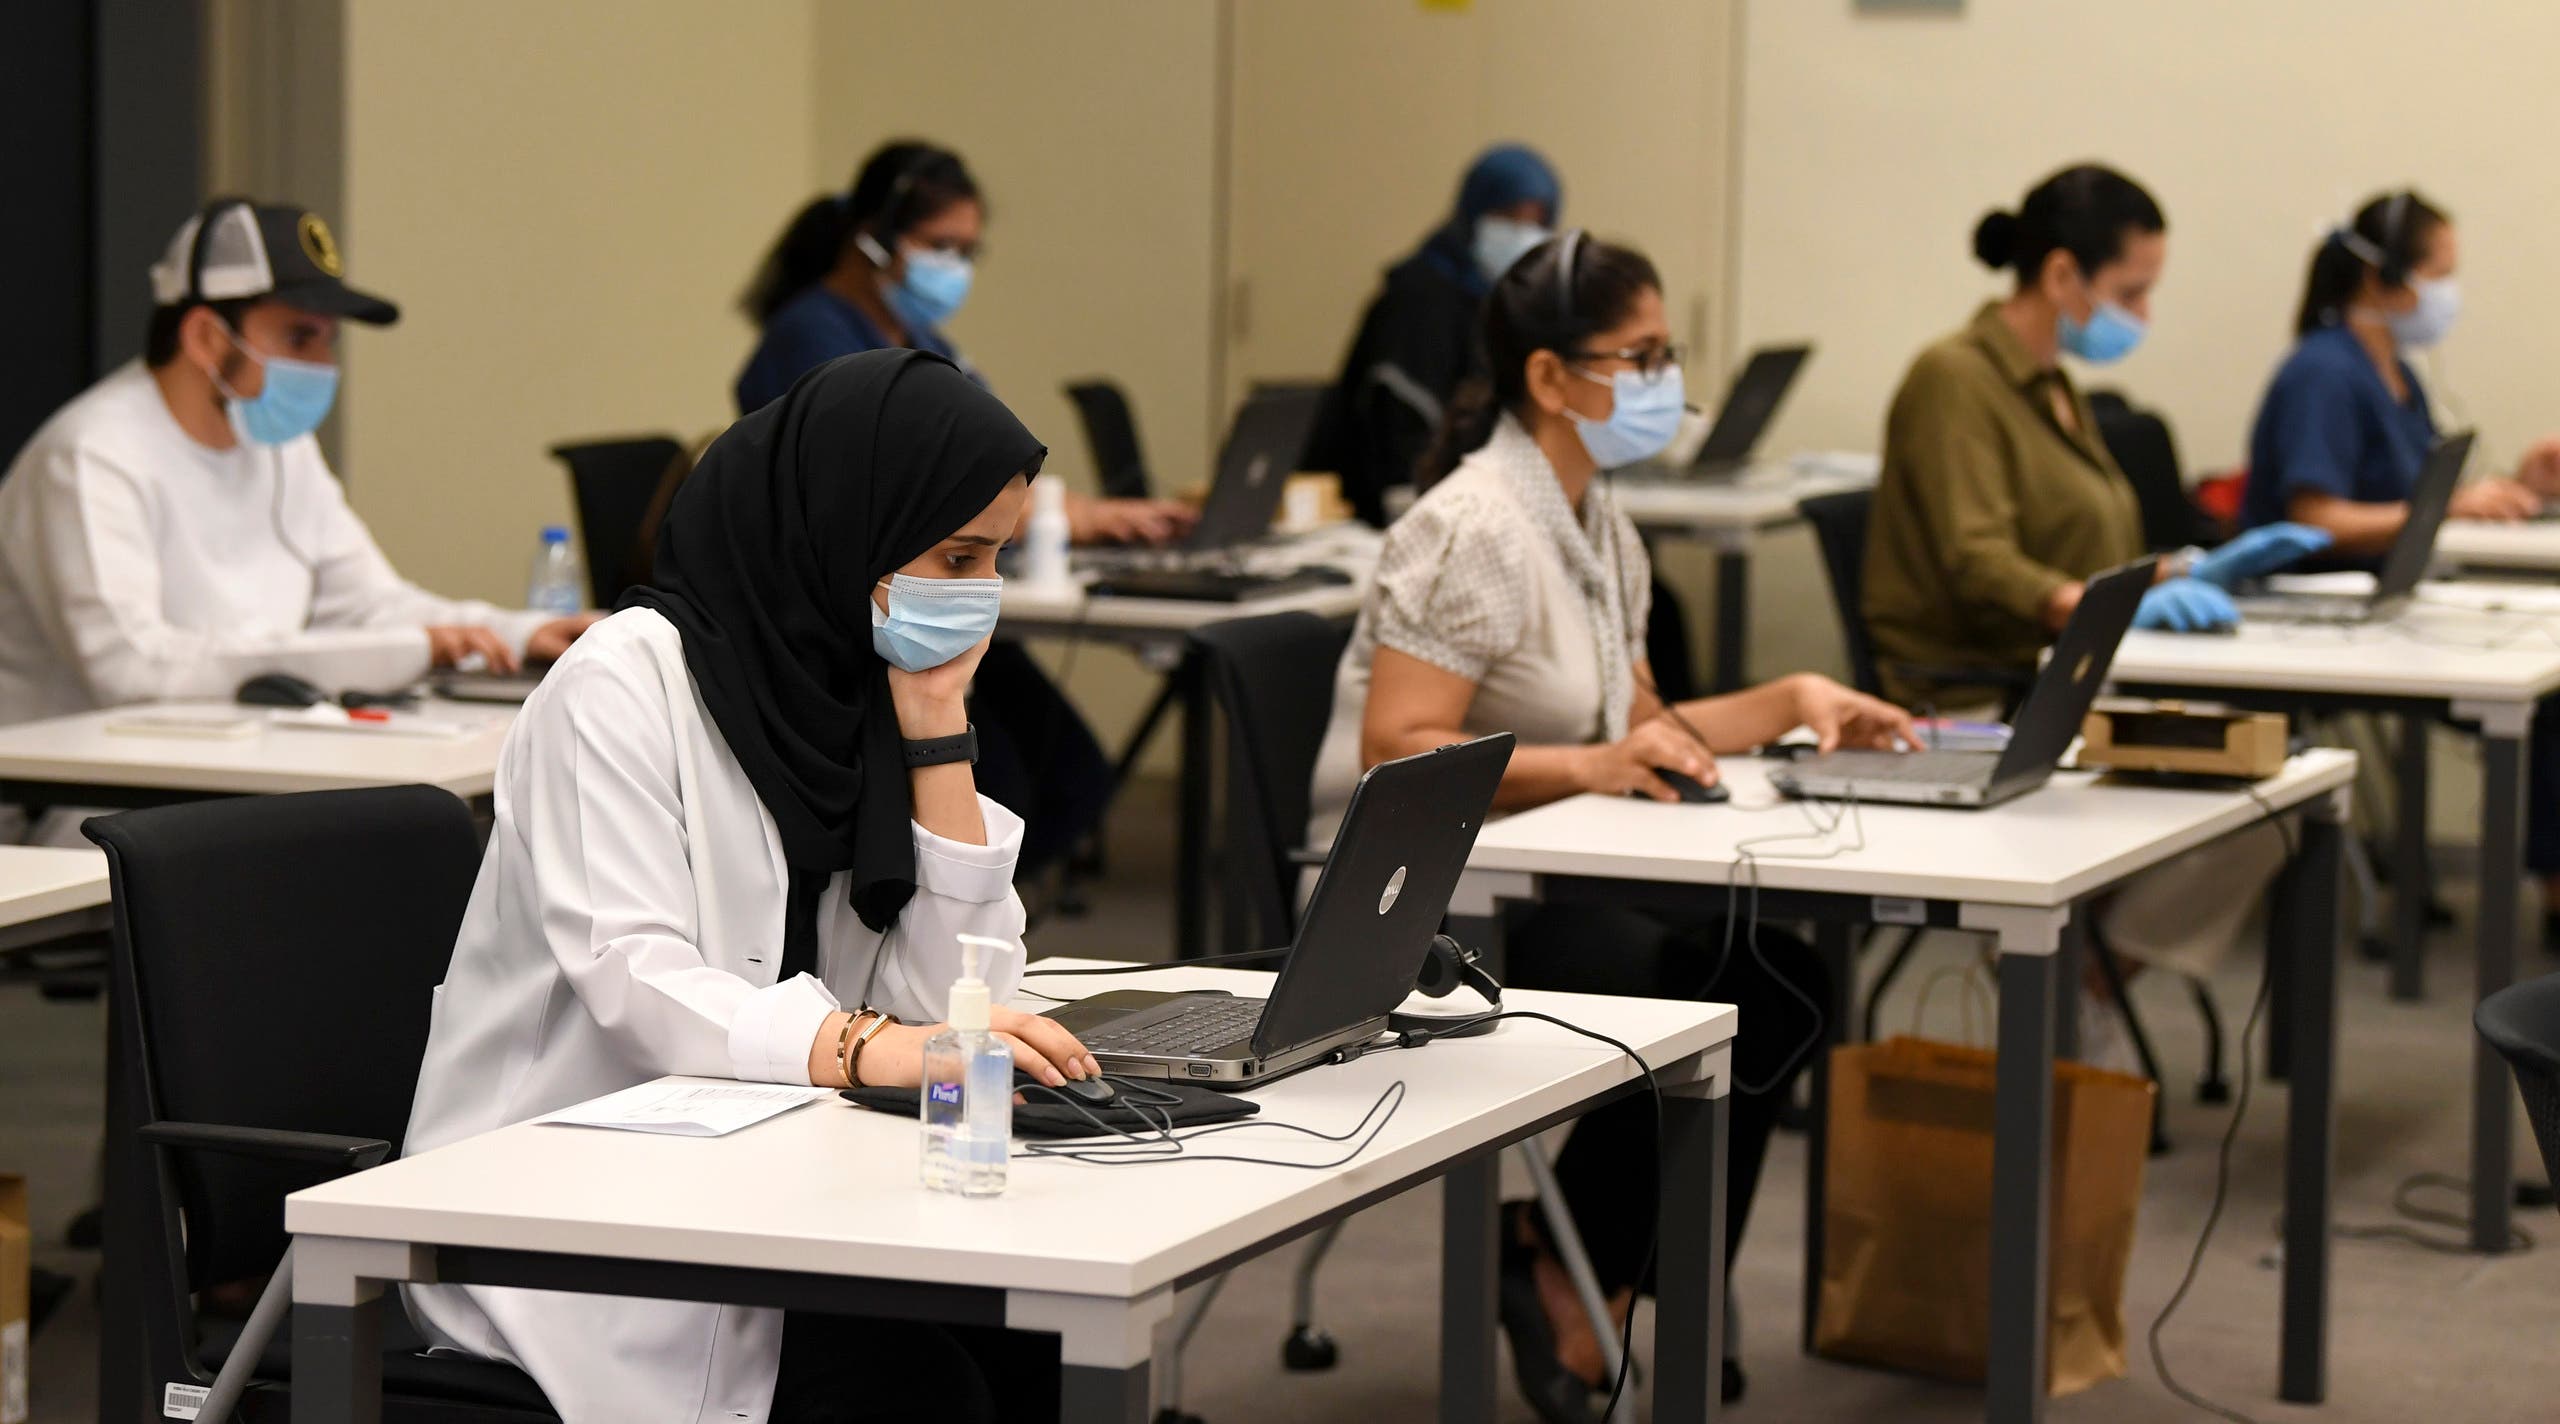 Employees at the Dubai COVID-19 Command and Control Center at Mohammed bin Rashid University in the Gulf emirate on May 20, 2020. (File photo: AFP)